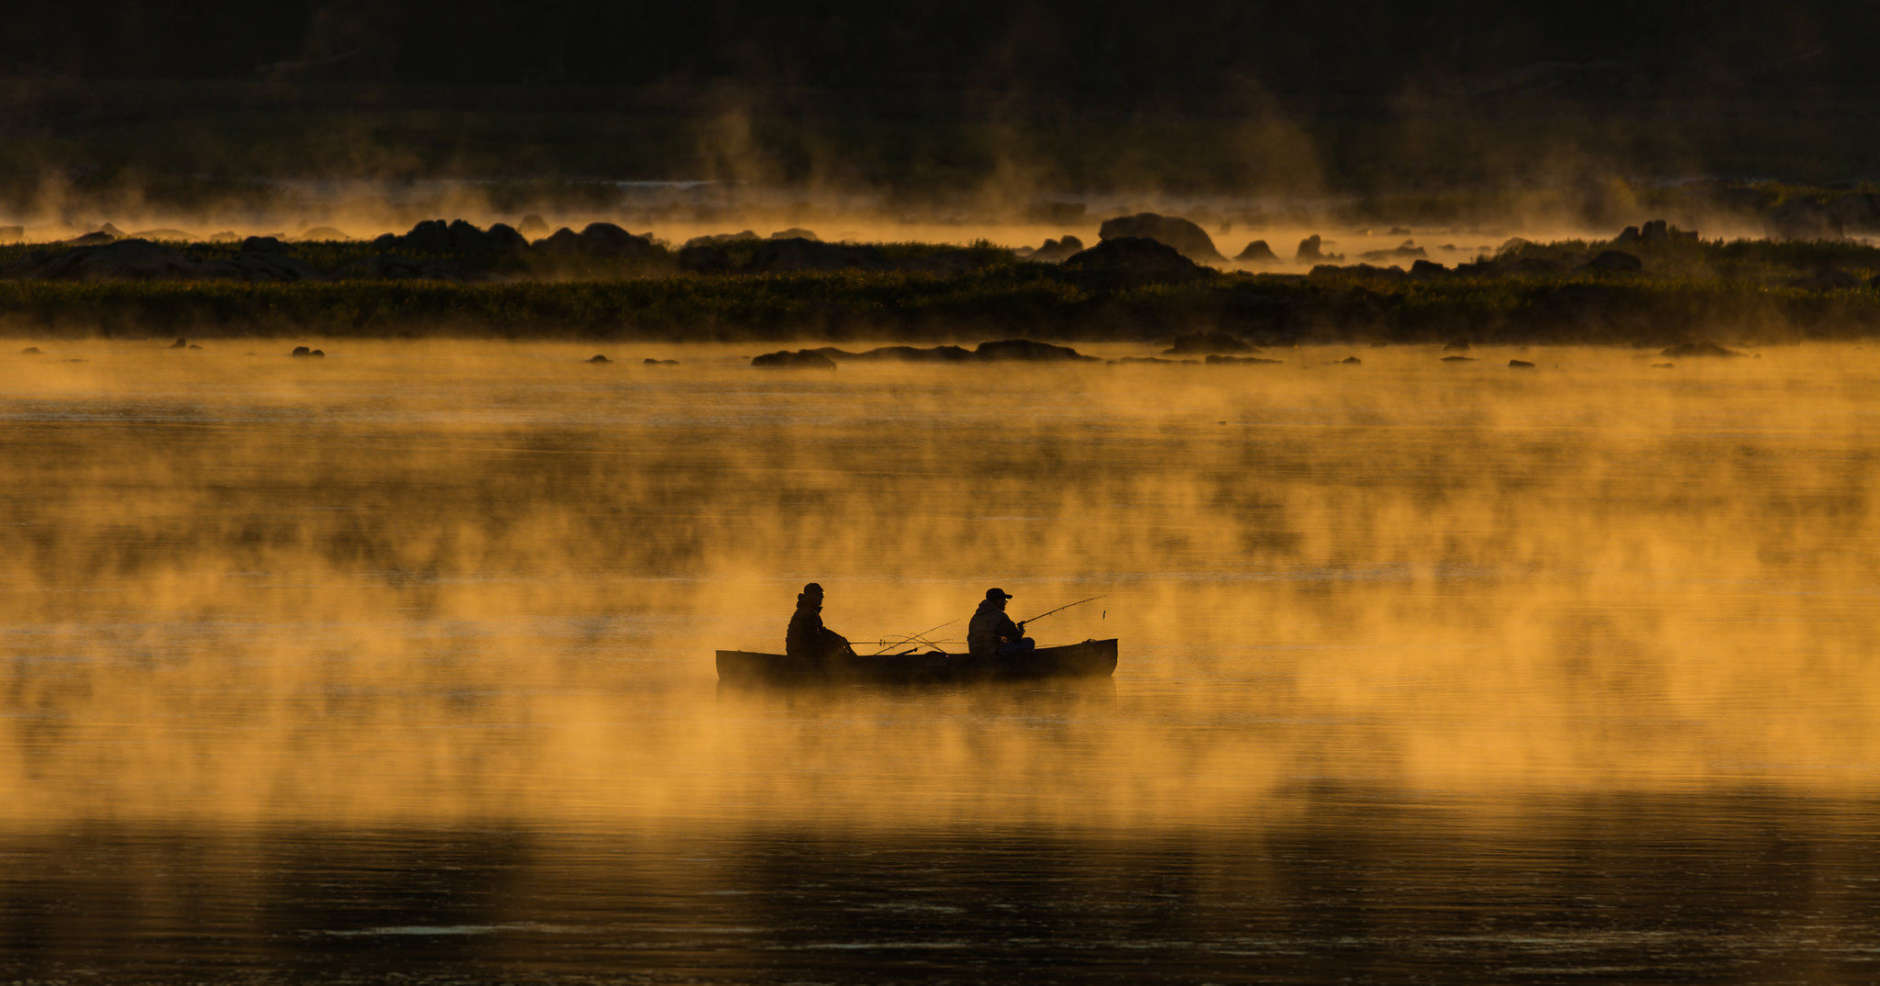 Fishermen on a misty fall morning by Nikunj Patel. (Courtesy of Maryland Department of Natural Resources)